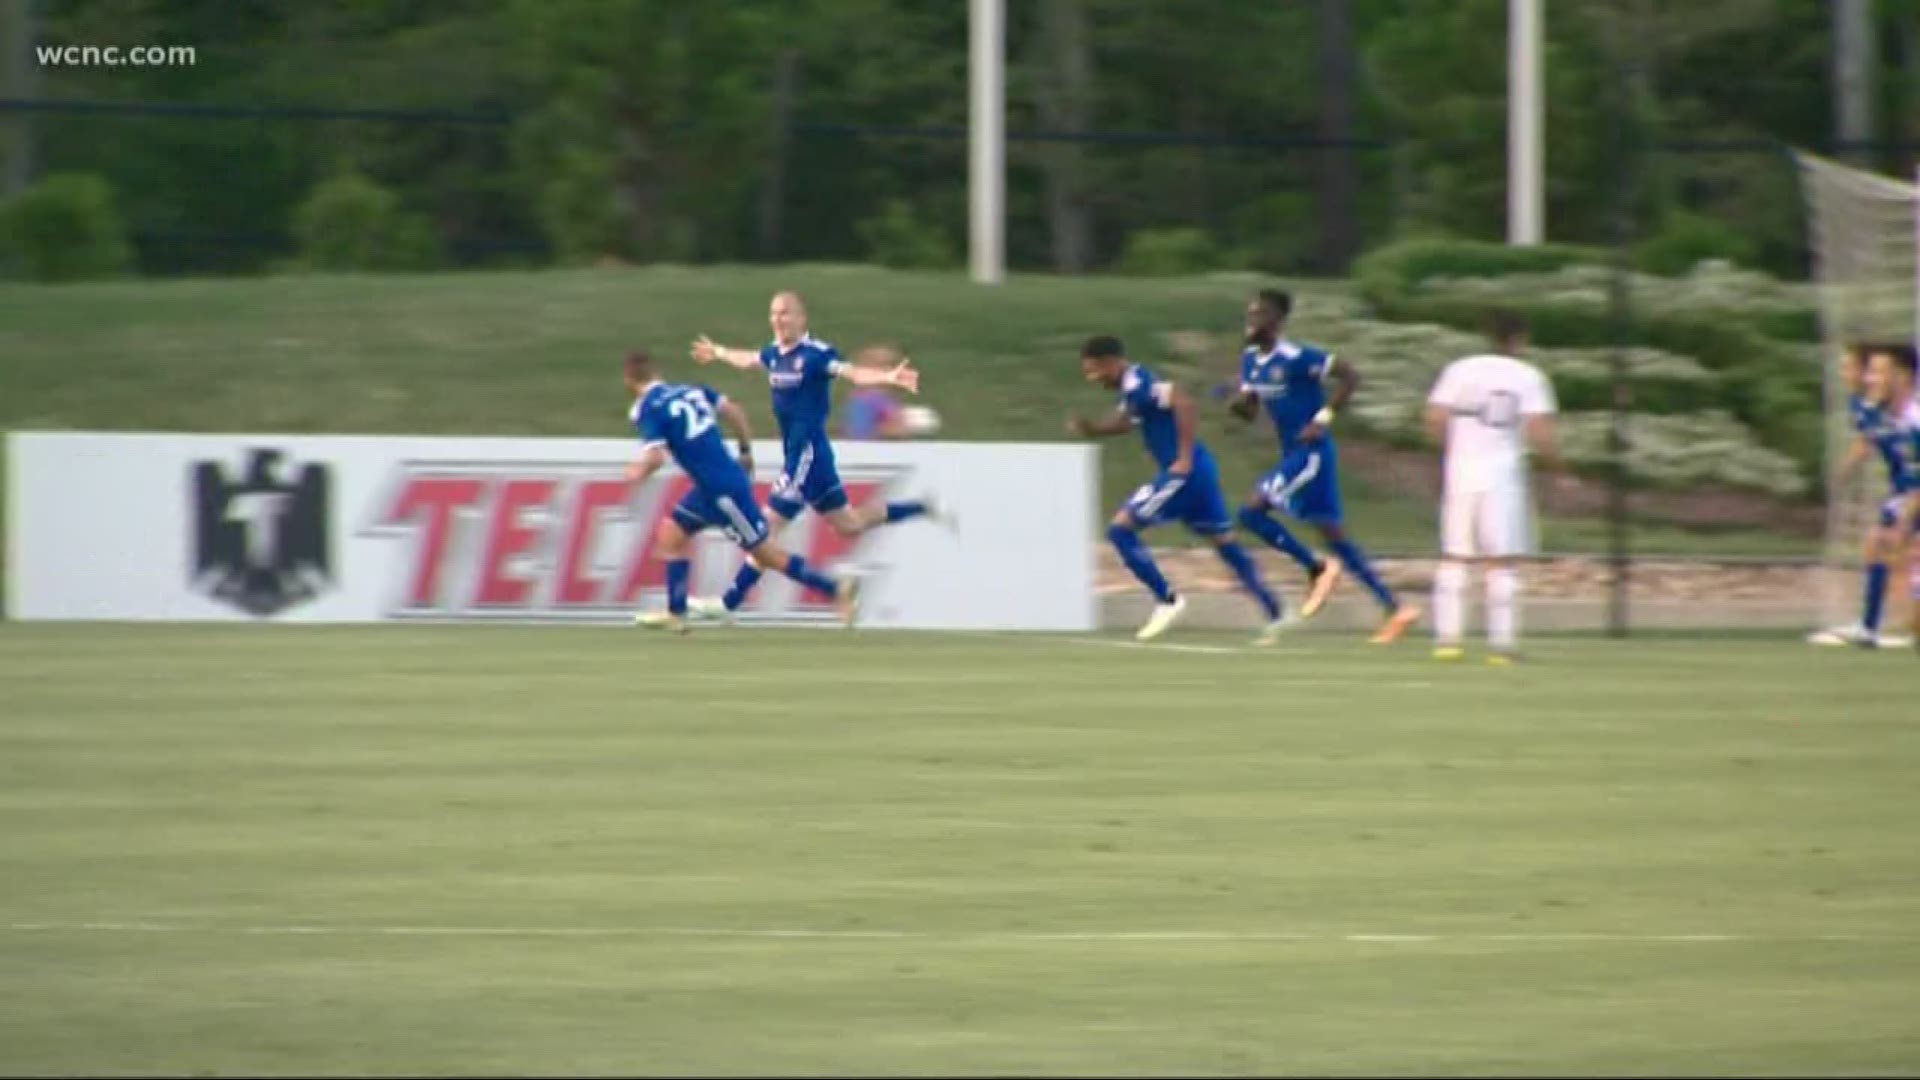 McKenna Woodhead was paralyzed from the waist down after a jet ski accident on Lake Wylie last year. She's an avid soccer fan. That's why the Charlotte Independence created the annual 'McKenna Strong' game.